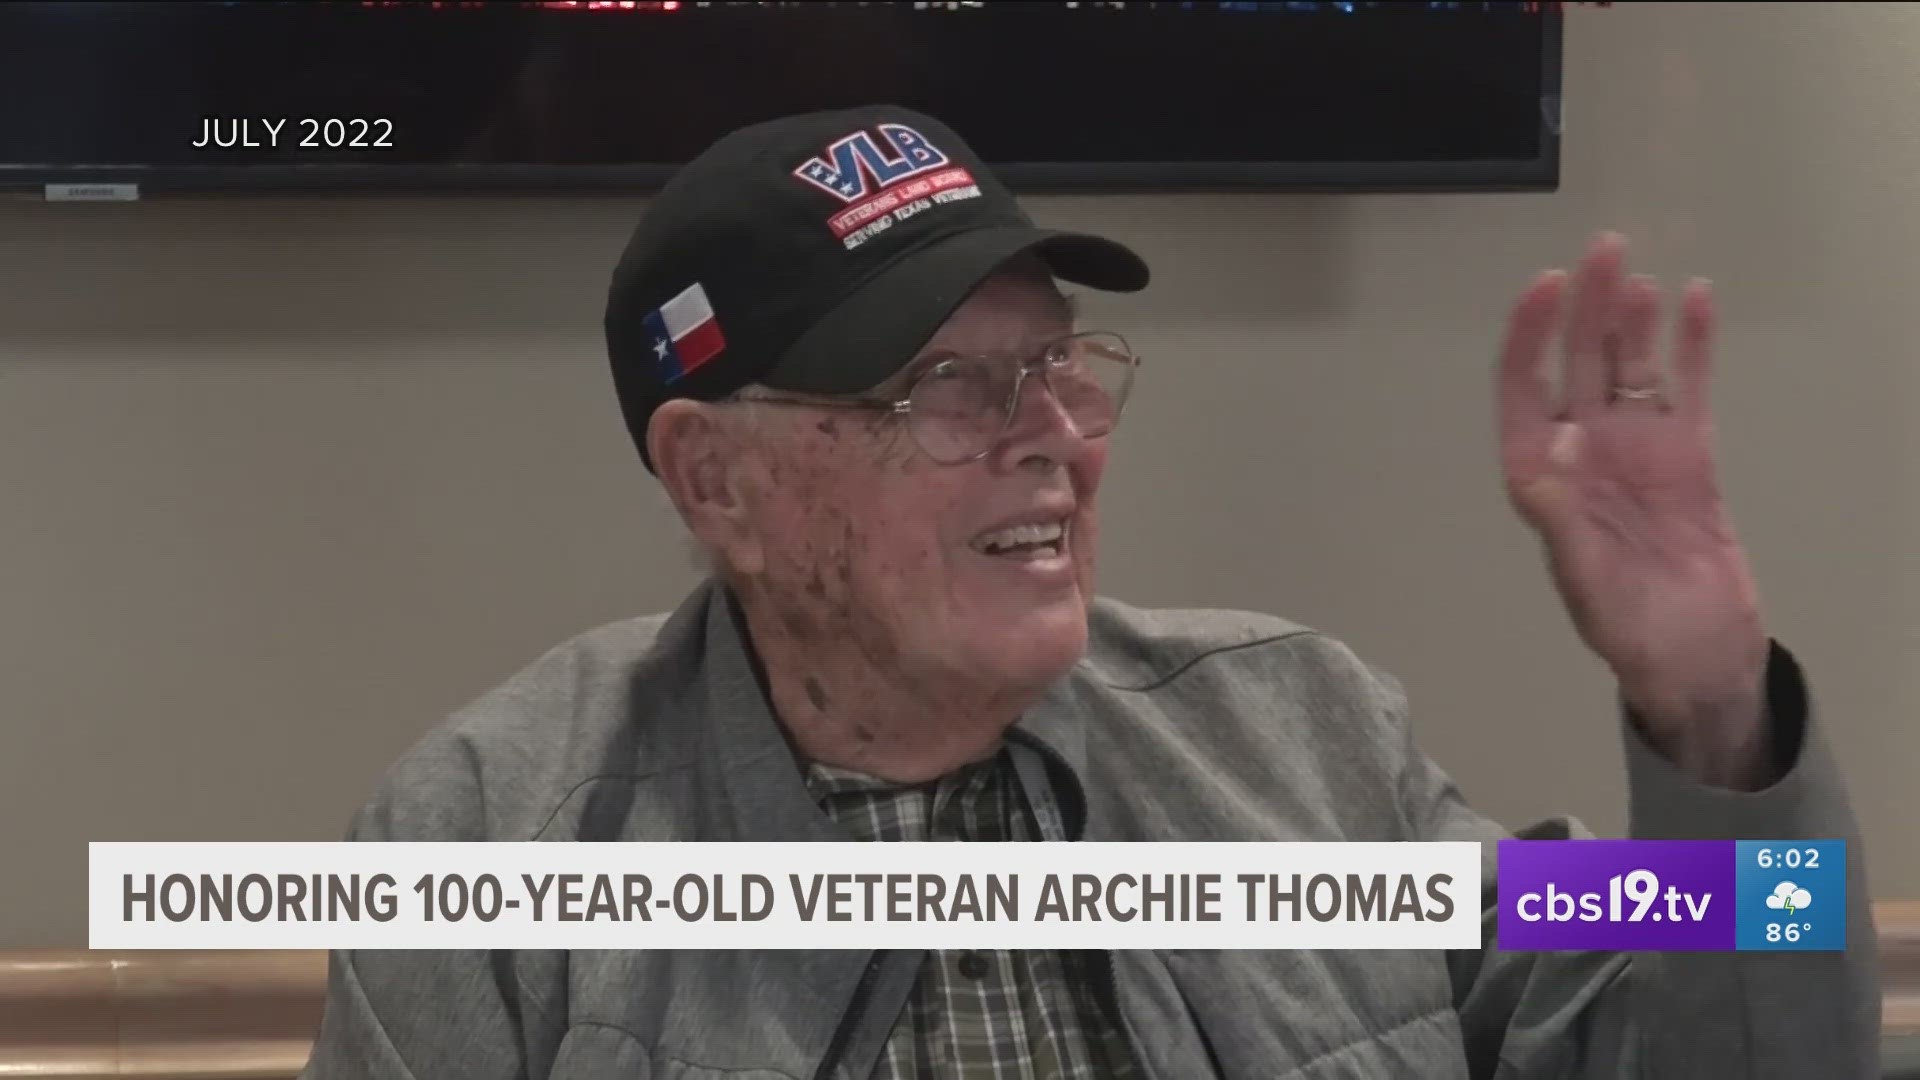 Remembering Archie Thomas, WWII Veteran and POW who wanted 100 birthday cards for this 100th birthday